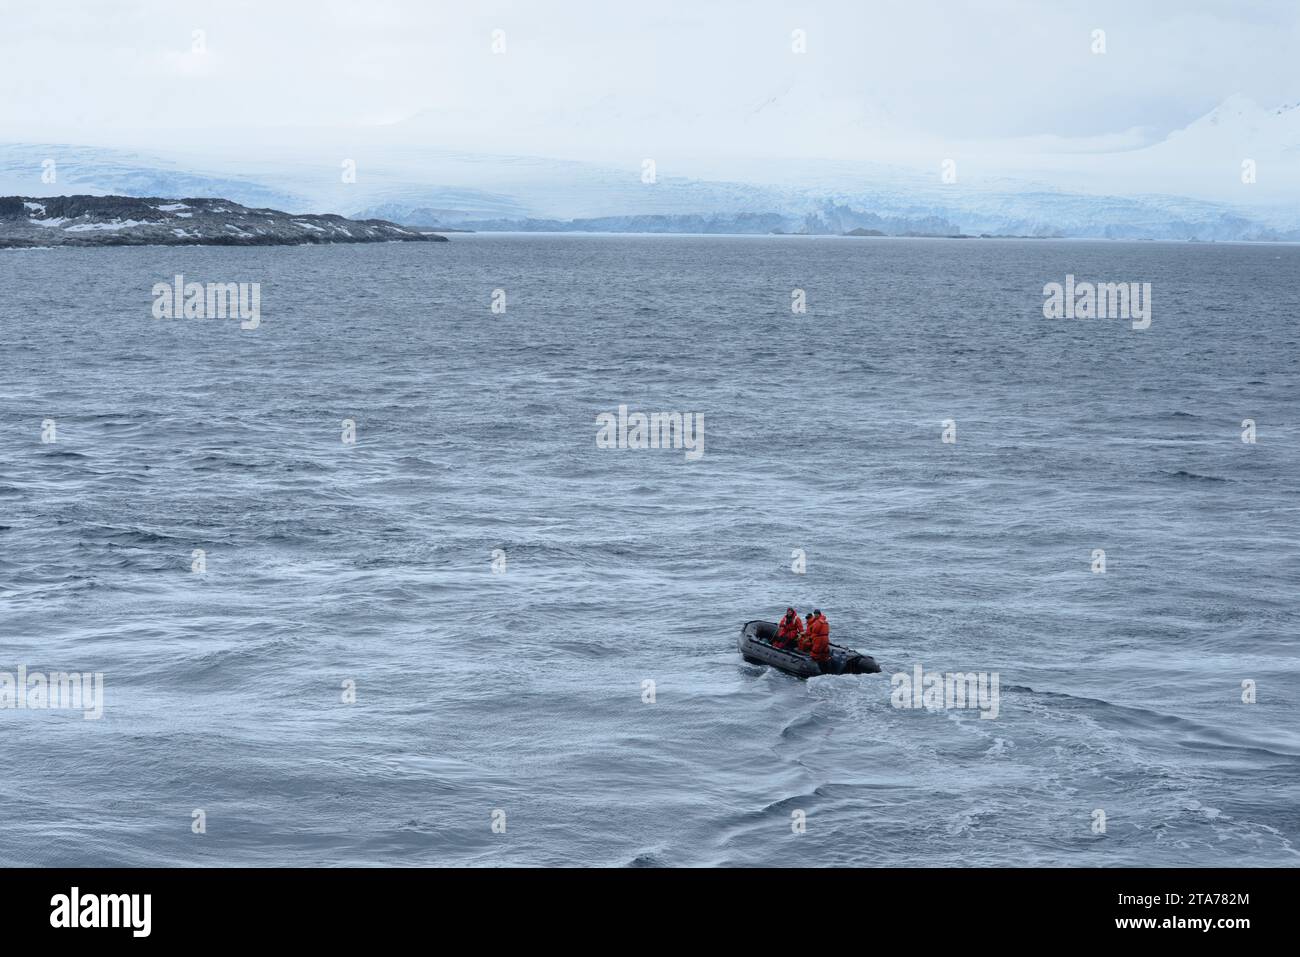 A small rubber boat carrying a team of researchers makes its way through the frigid waters off the coast of Antarctica, with the barren landscape and Stock Photo